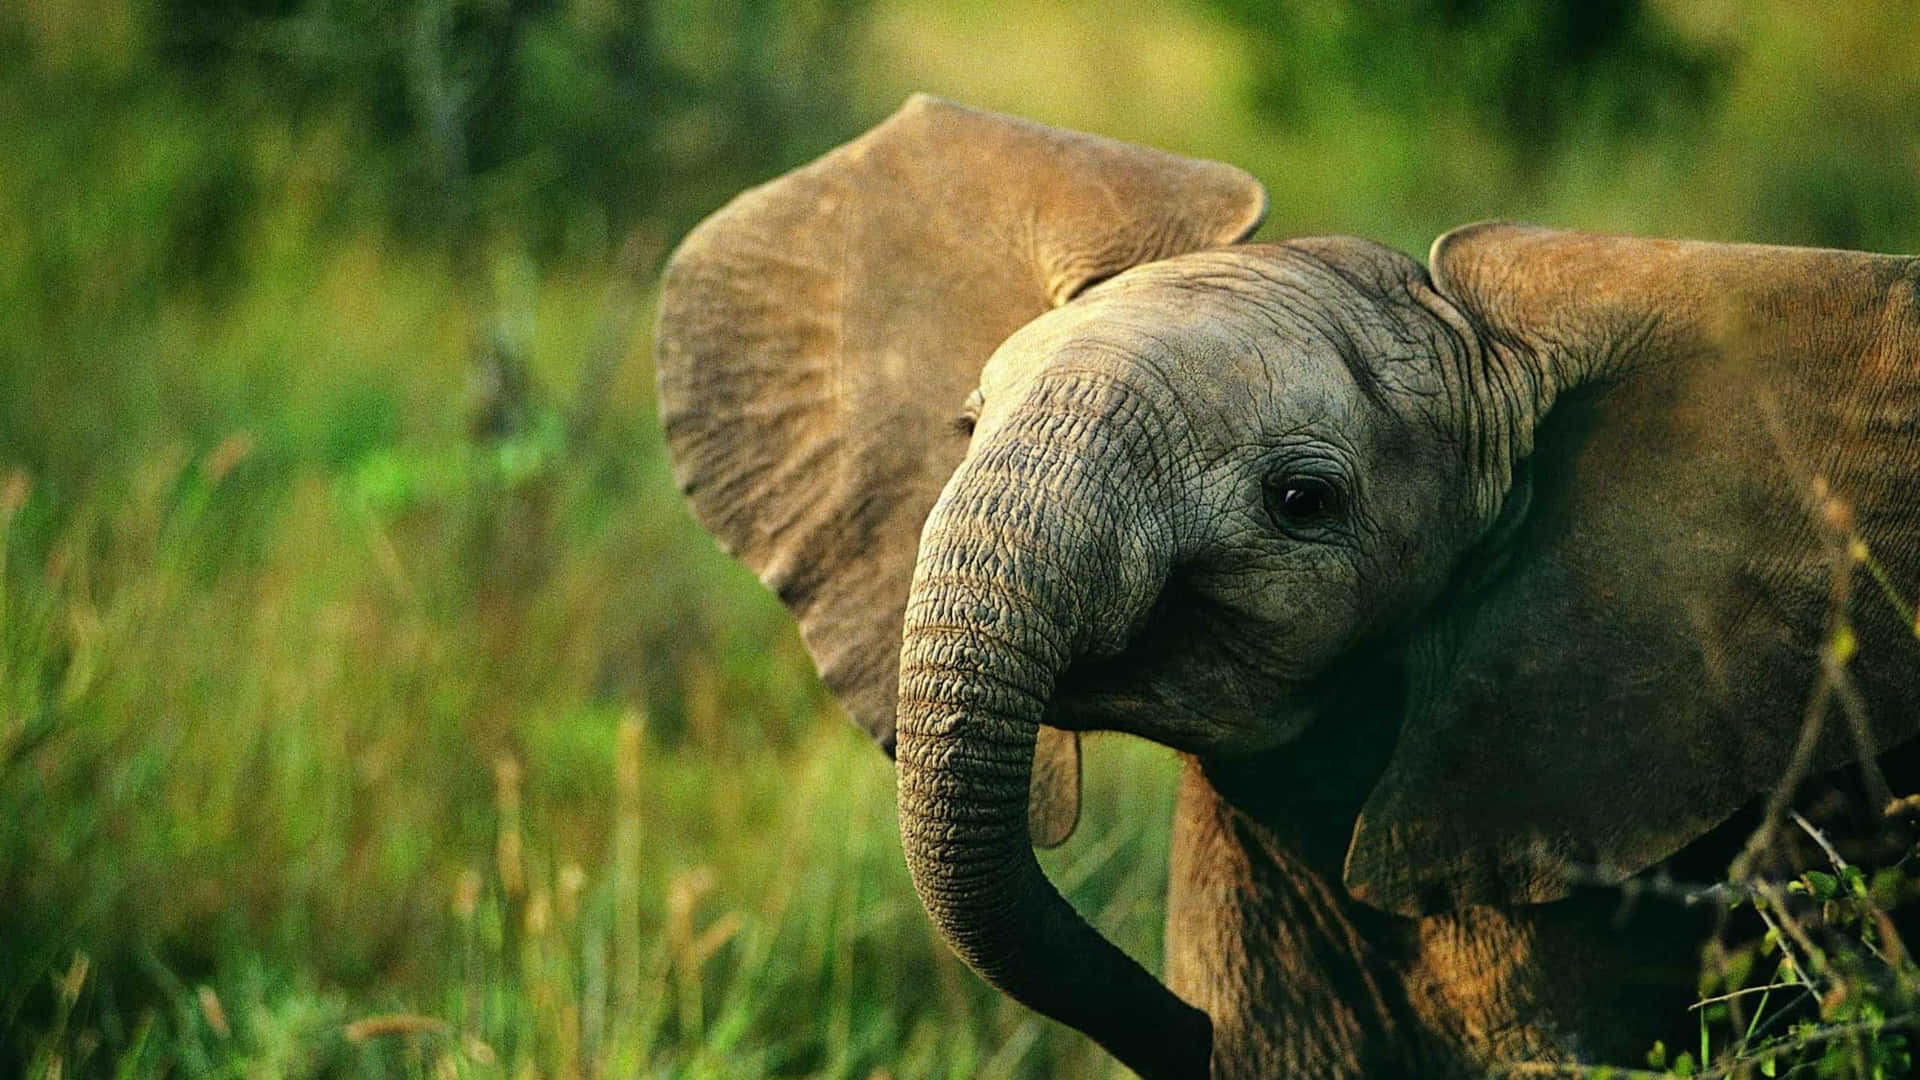 A Baby Elephant Is Standing In The Grass